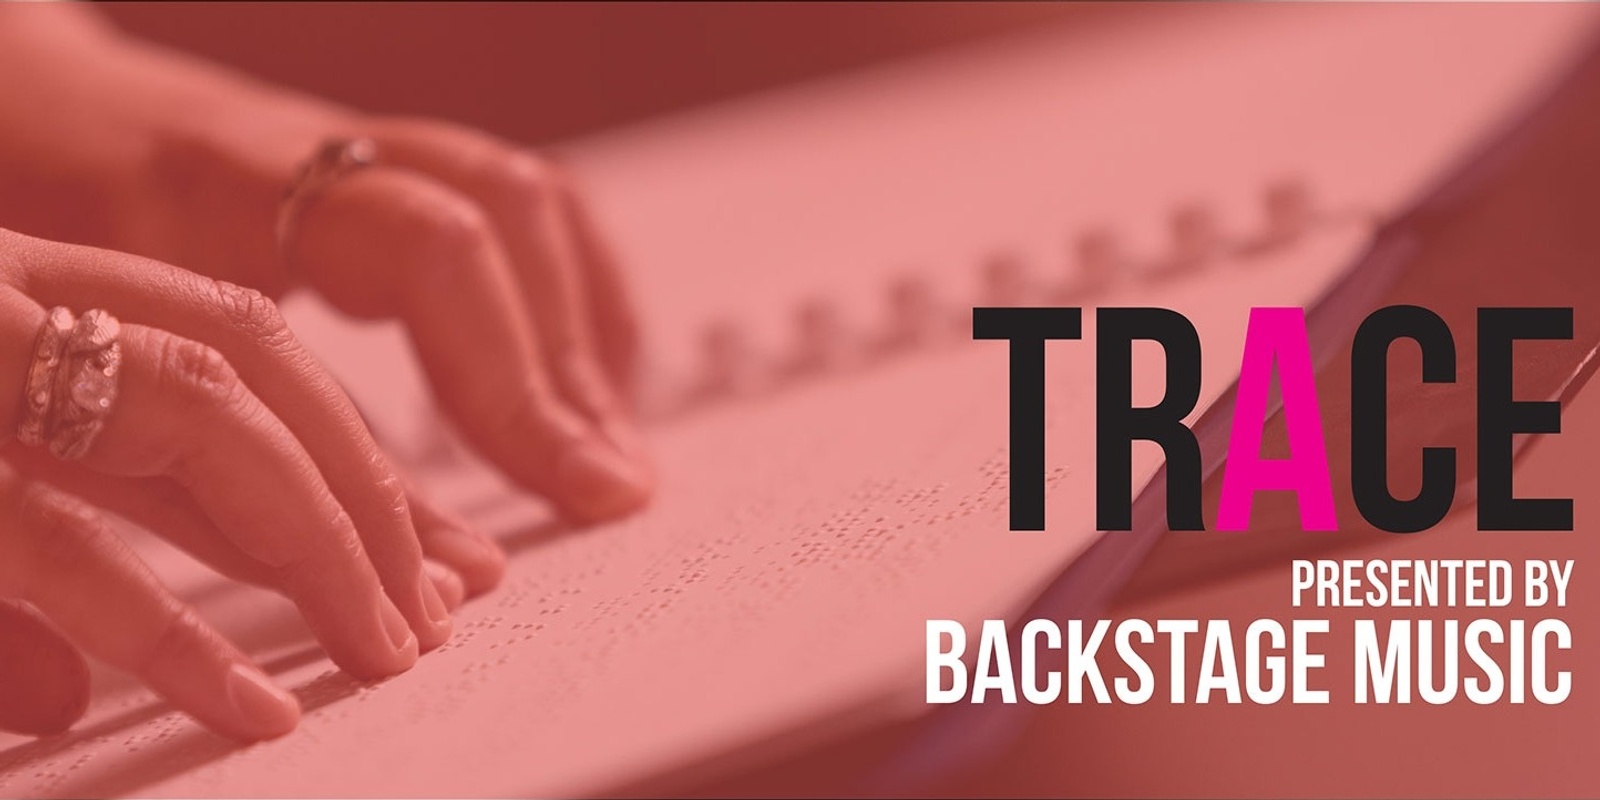 Banner image for Trace presented presented by BackStage Music